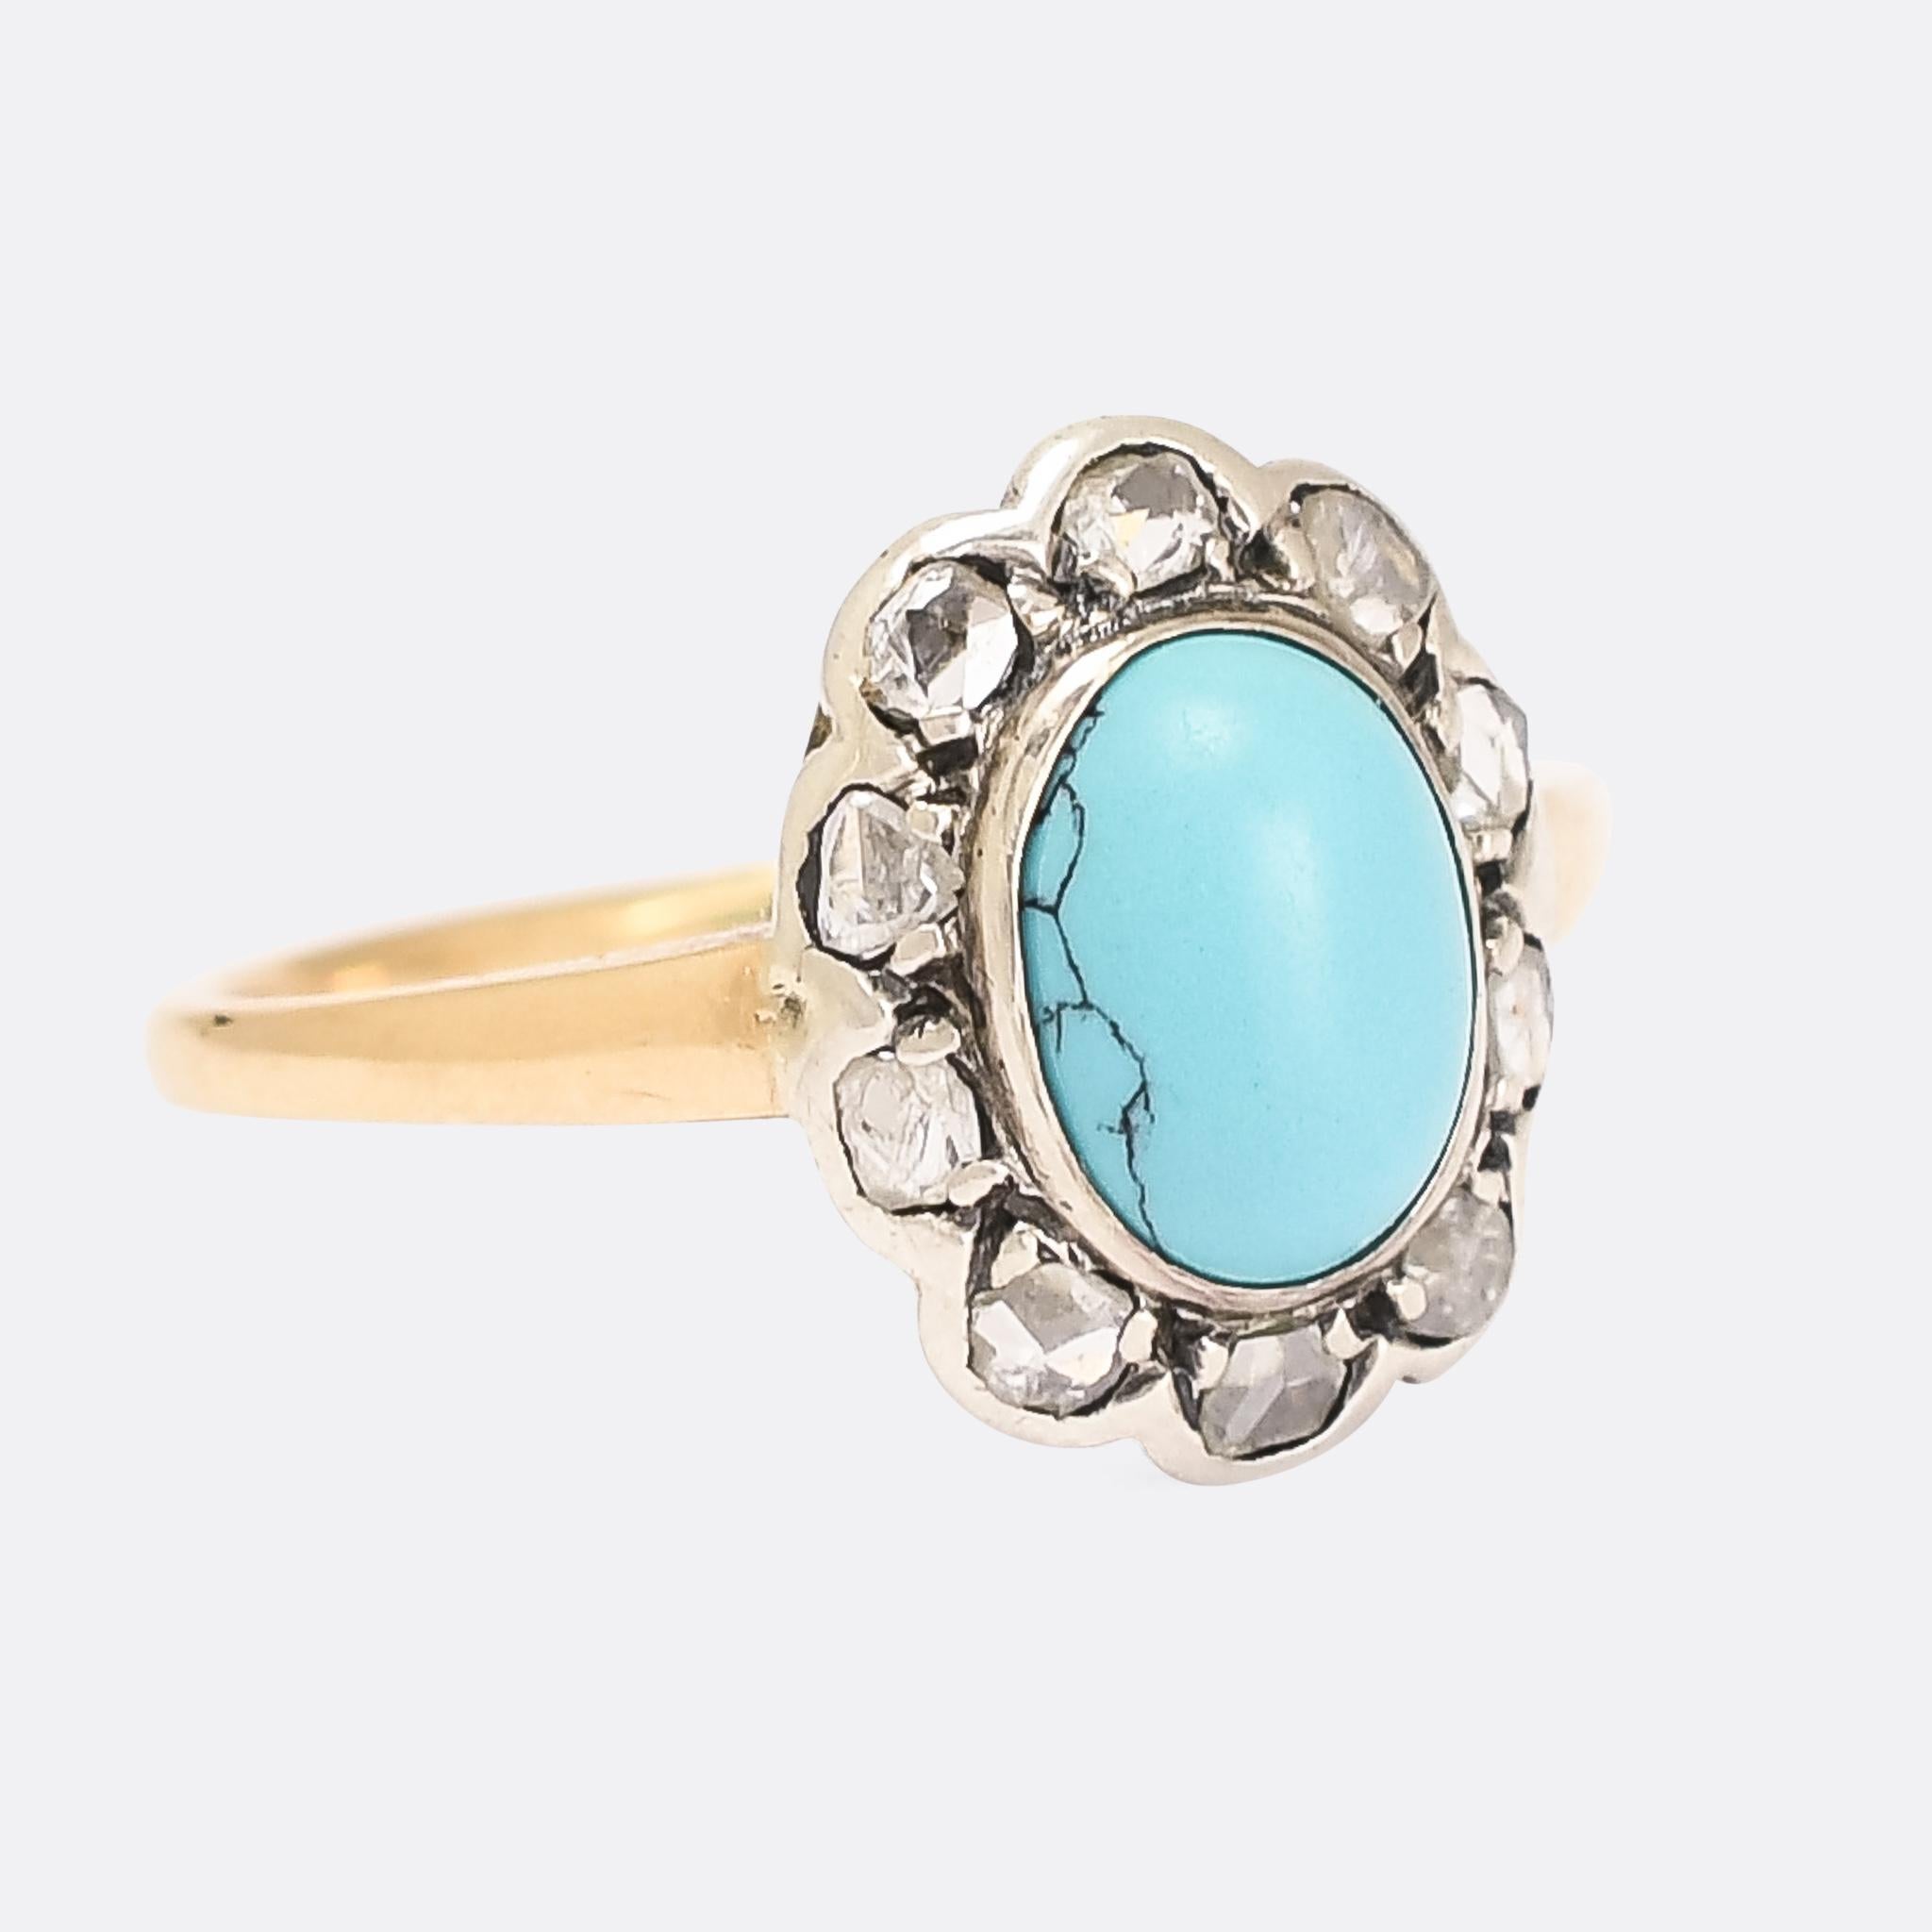 The most lovely Victorian flower cluster ring dating from the turn of the 20th Century. It's set with a highly domed turquoise matrix cabochon, with a rose cut diamond surround - each diamond set in silver to mimic petals. The band is modelled in 15